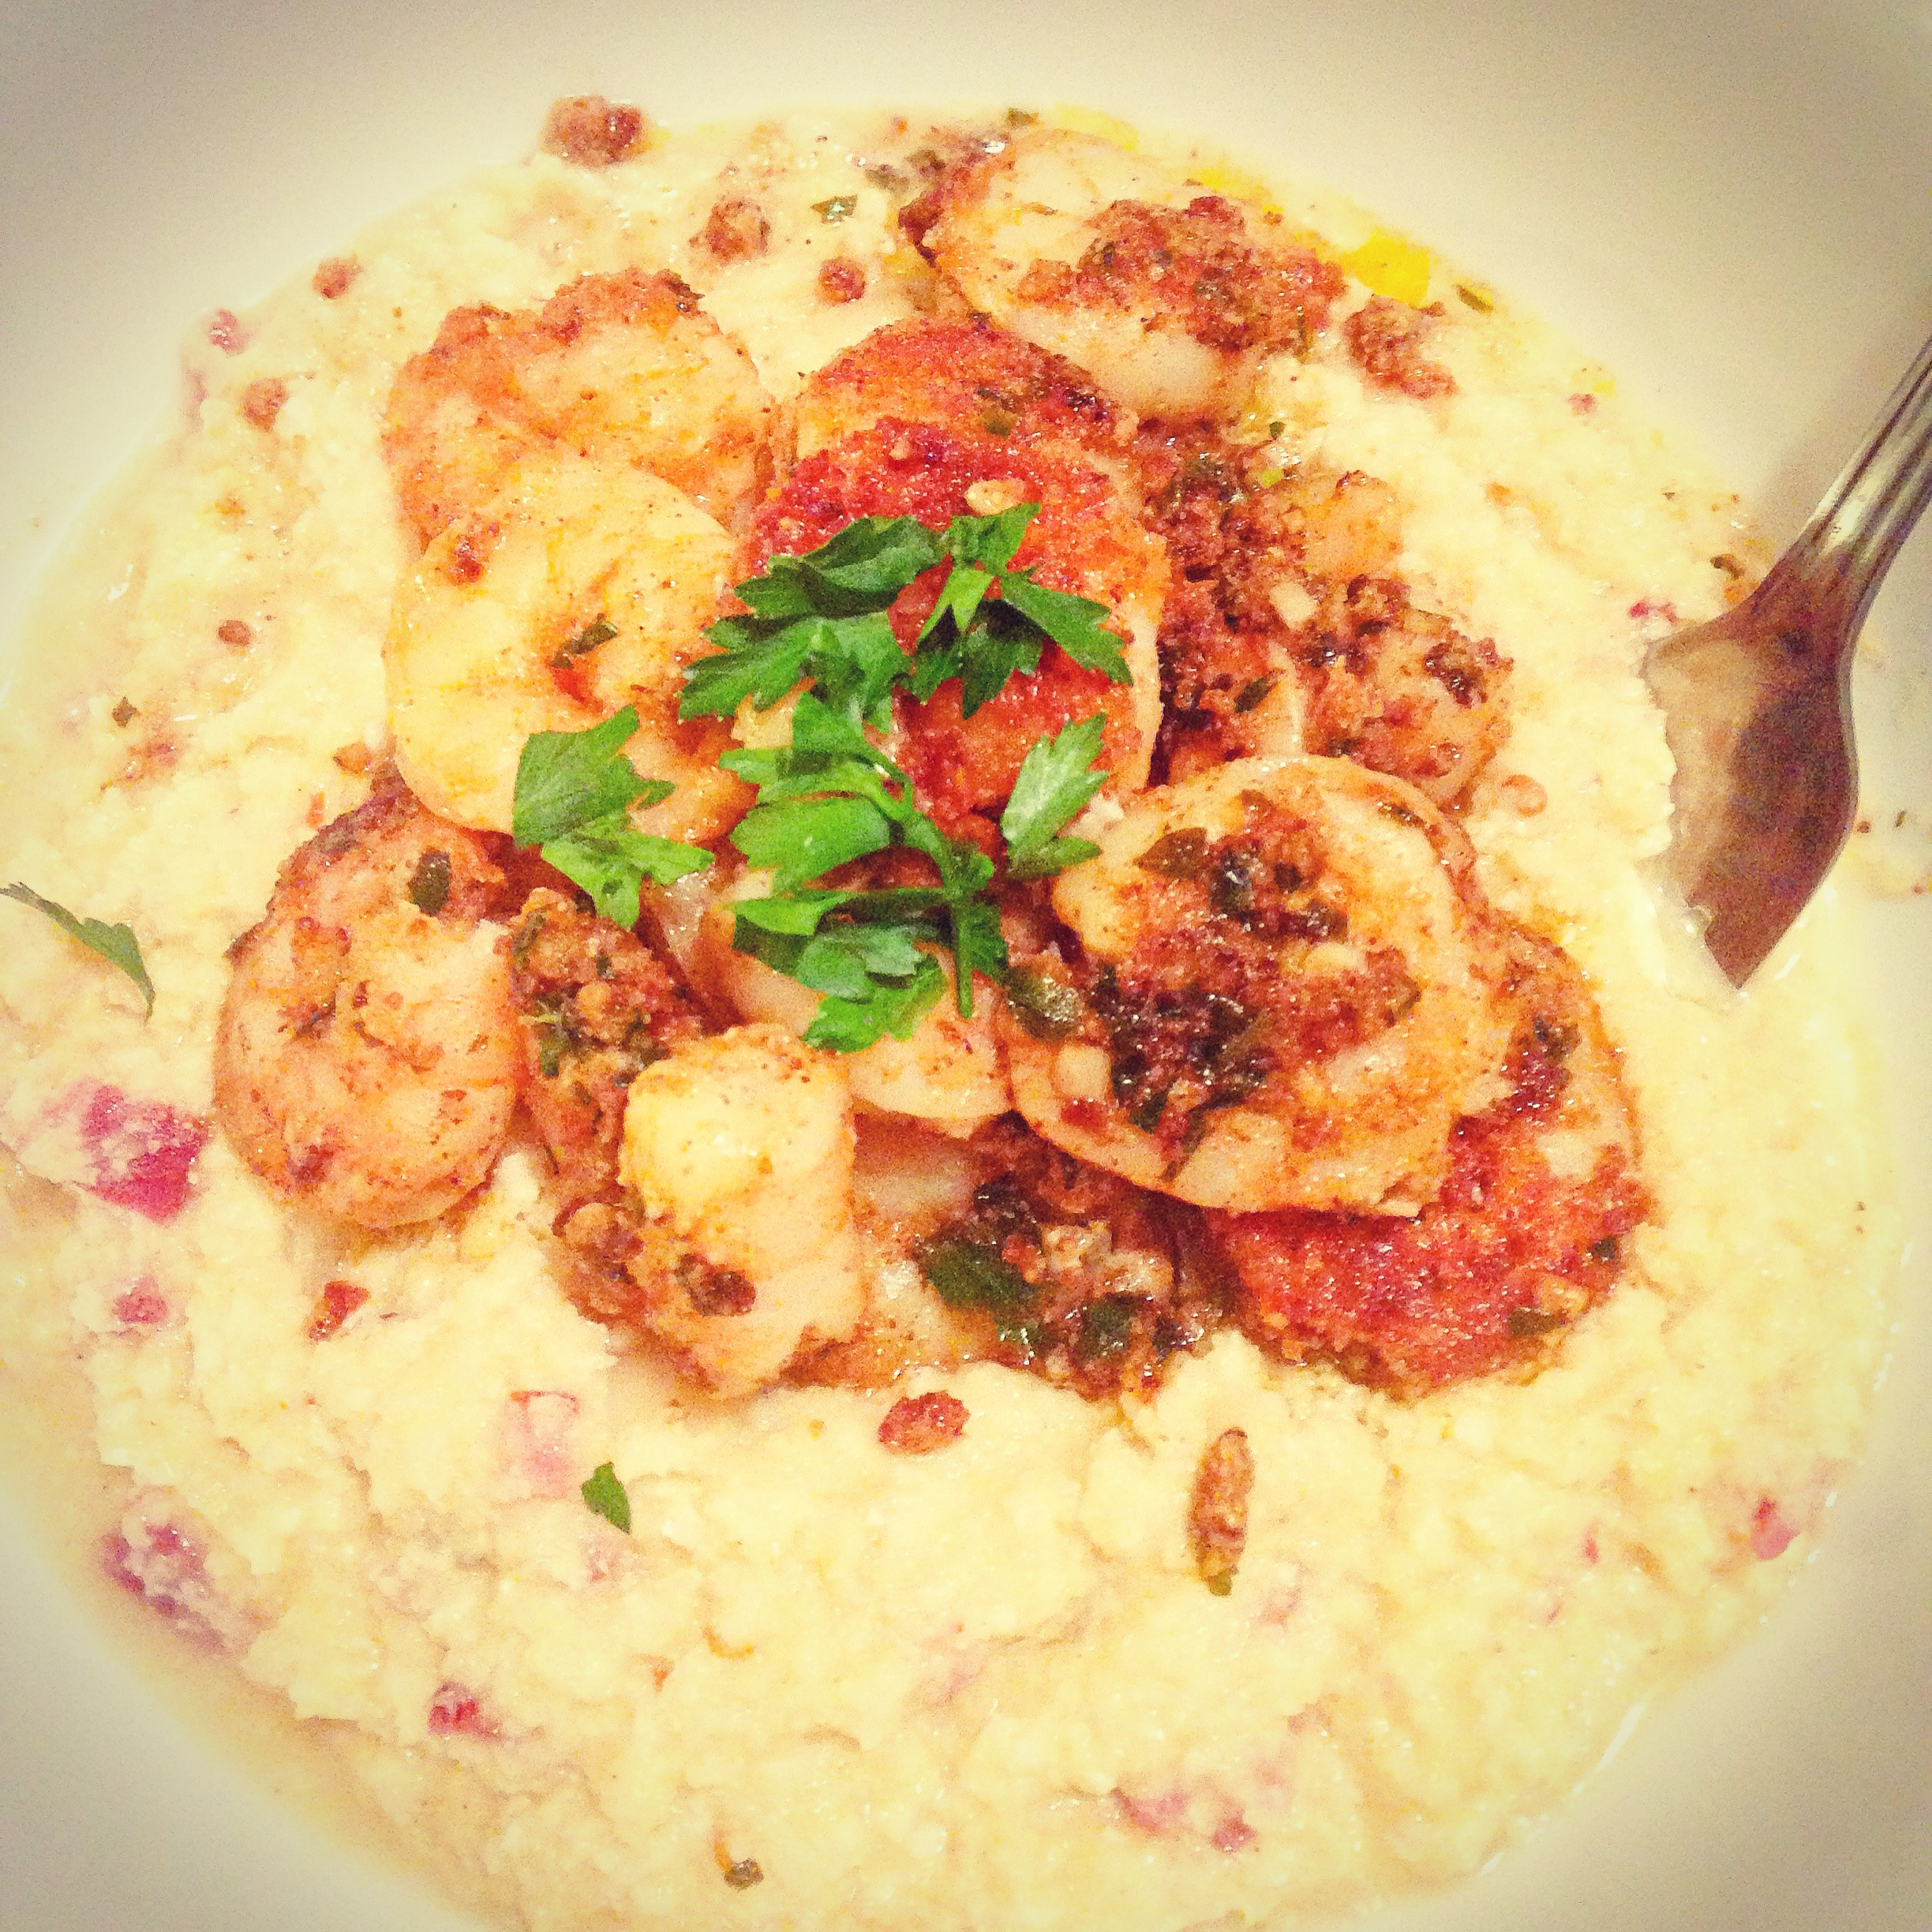 Healthy Shrimp And Grits Recipe
 Yum Best Healthy Shrimp and Grits Recipe Feel good Eat